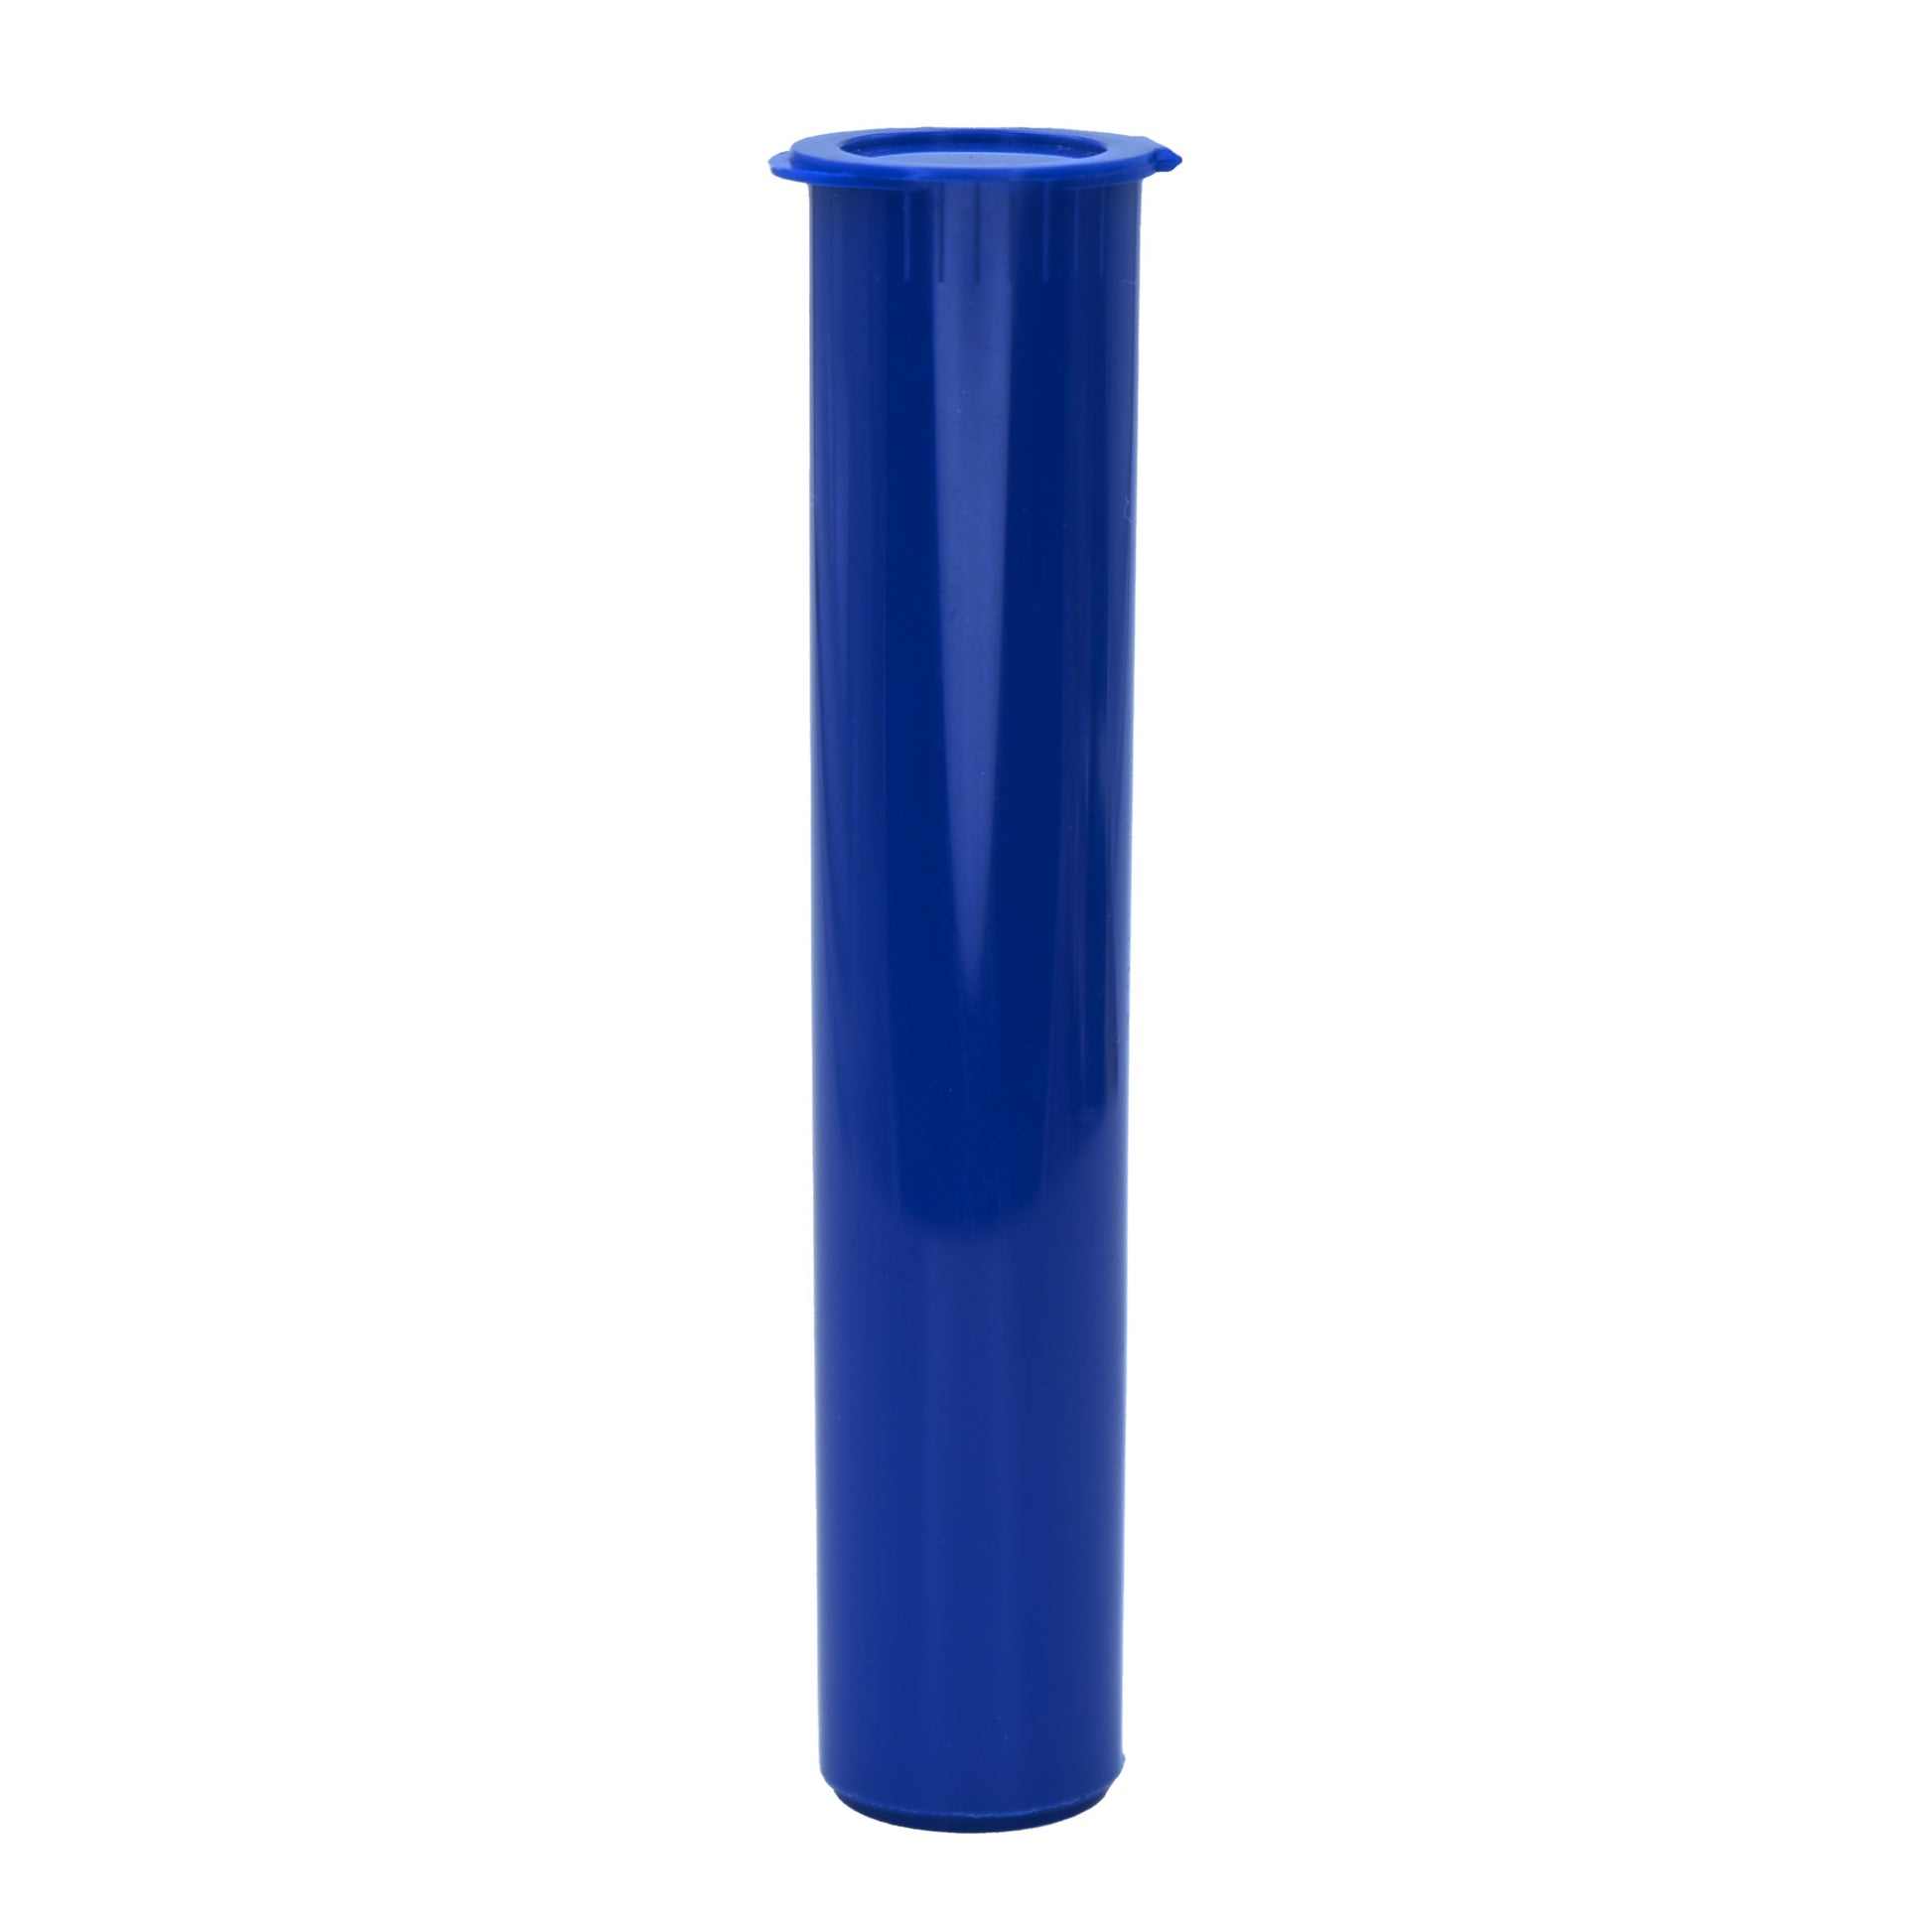 Pre Roll Storage Tube 98mm with Label - Progress Promotional Products